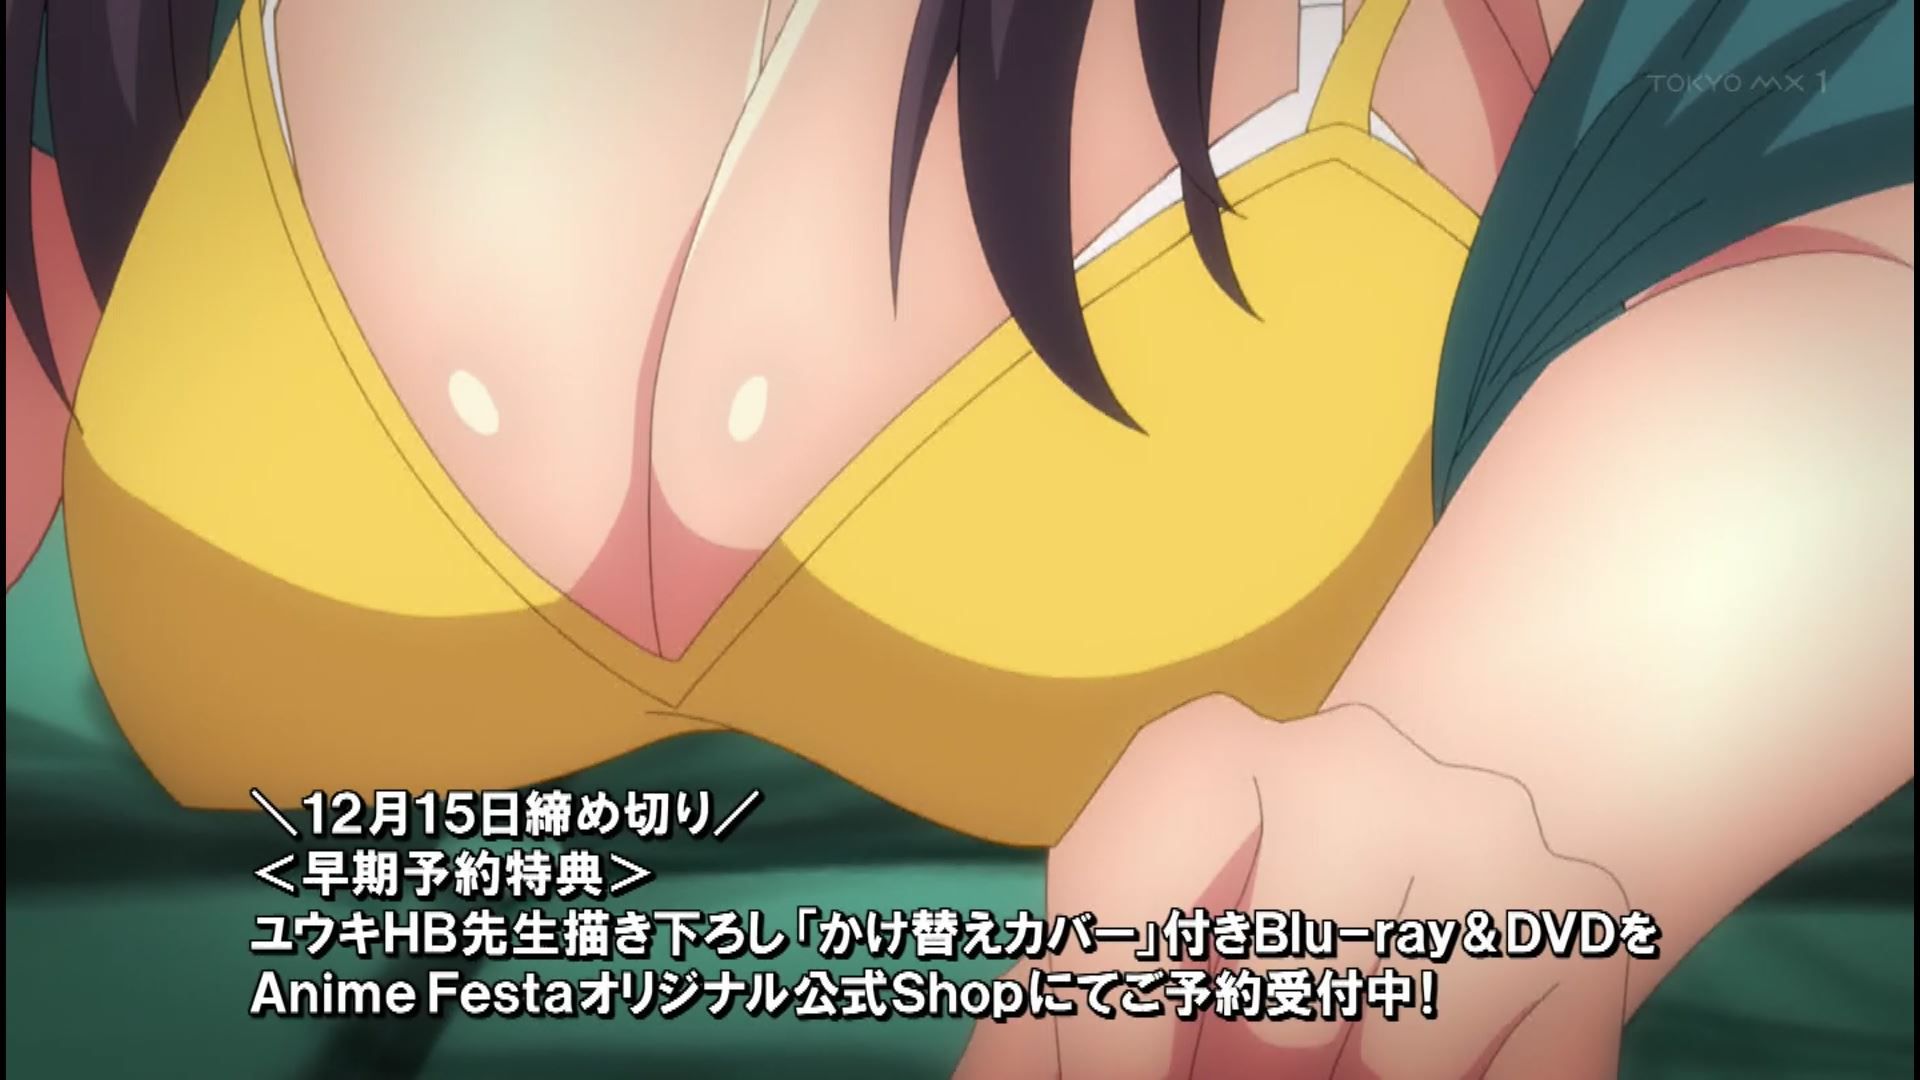 In episode 4 of the anime "Harem Kyampu!", the scene where you have sex with a girl in a tent normally! 8